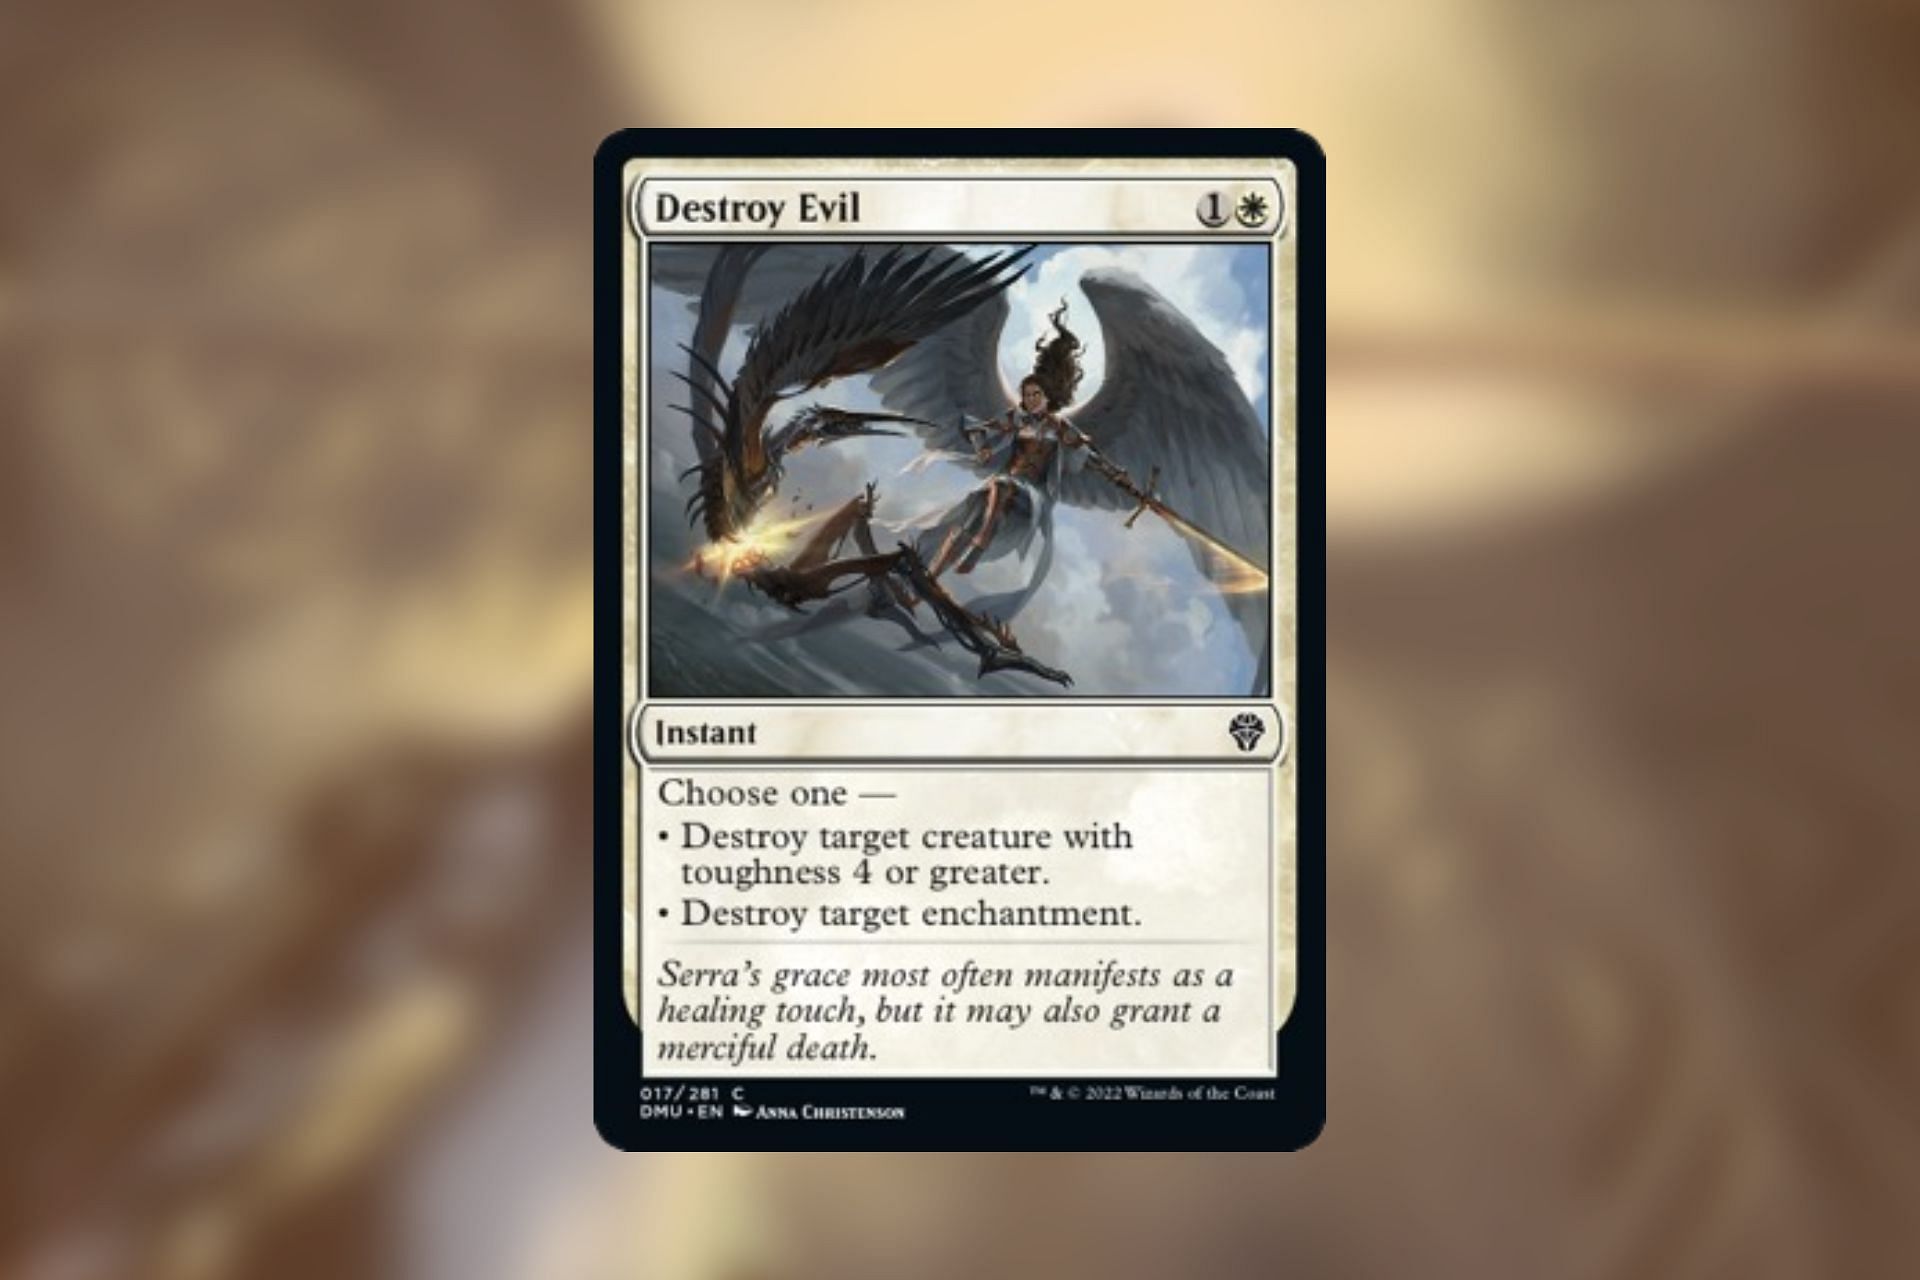 Destroy Evil is exactly what White is supposed to do in MTG (Image via Wizards of the Coast)